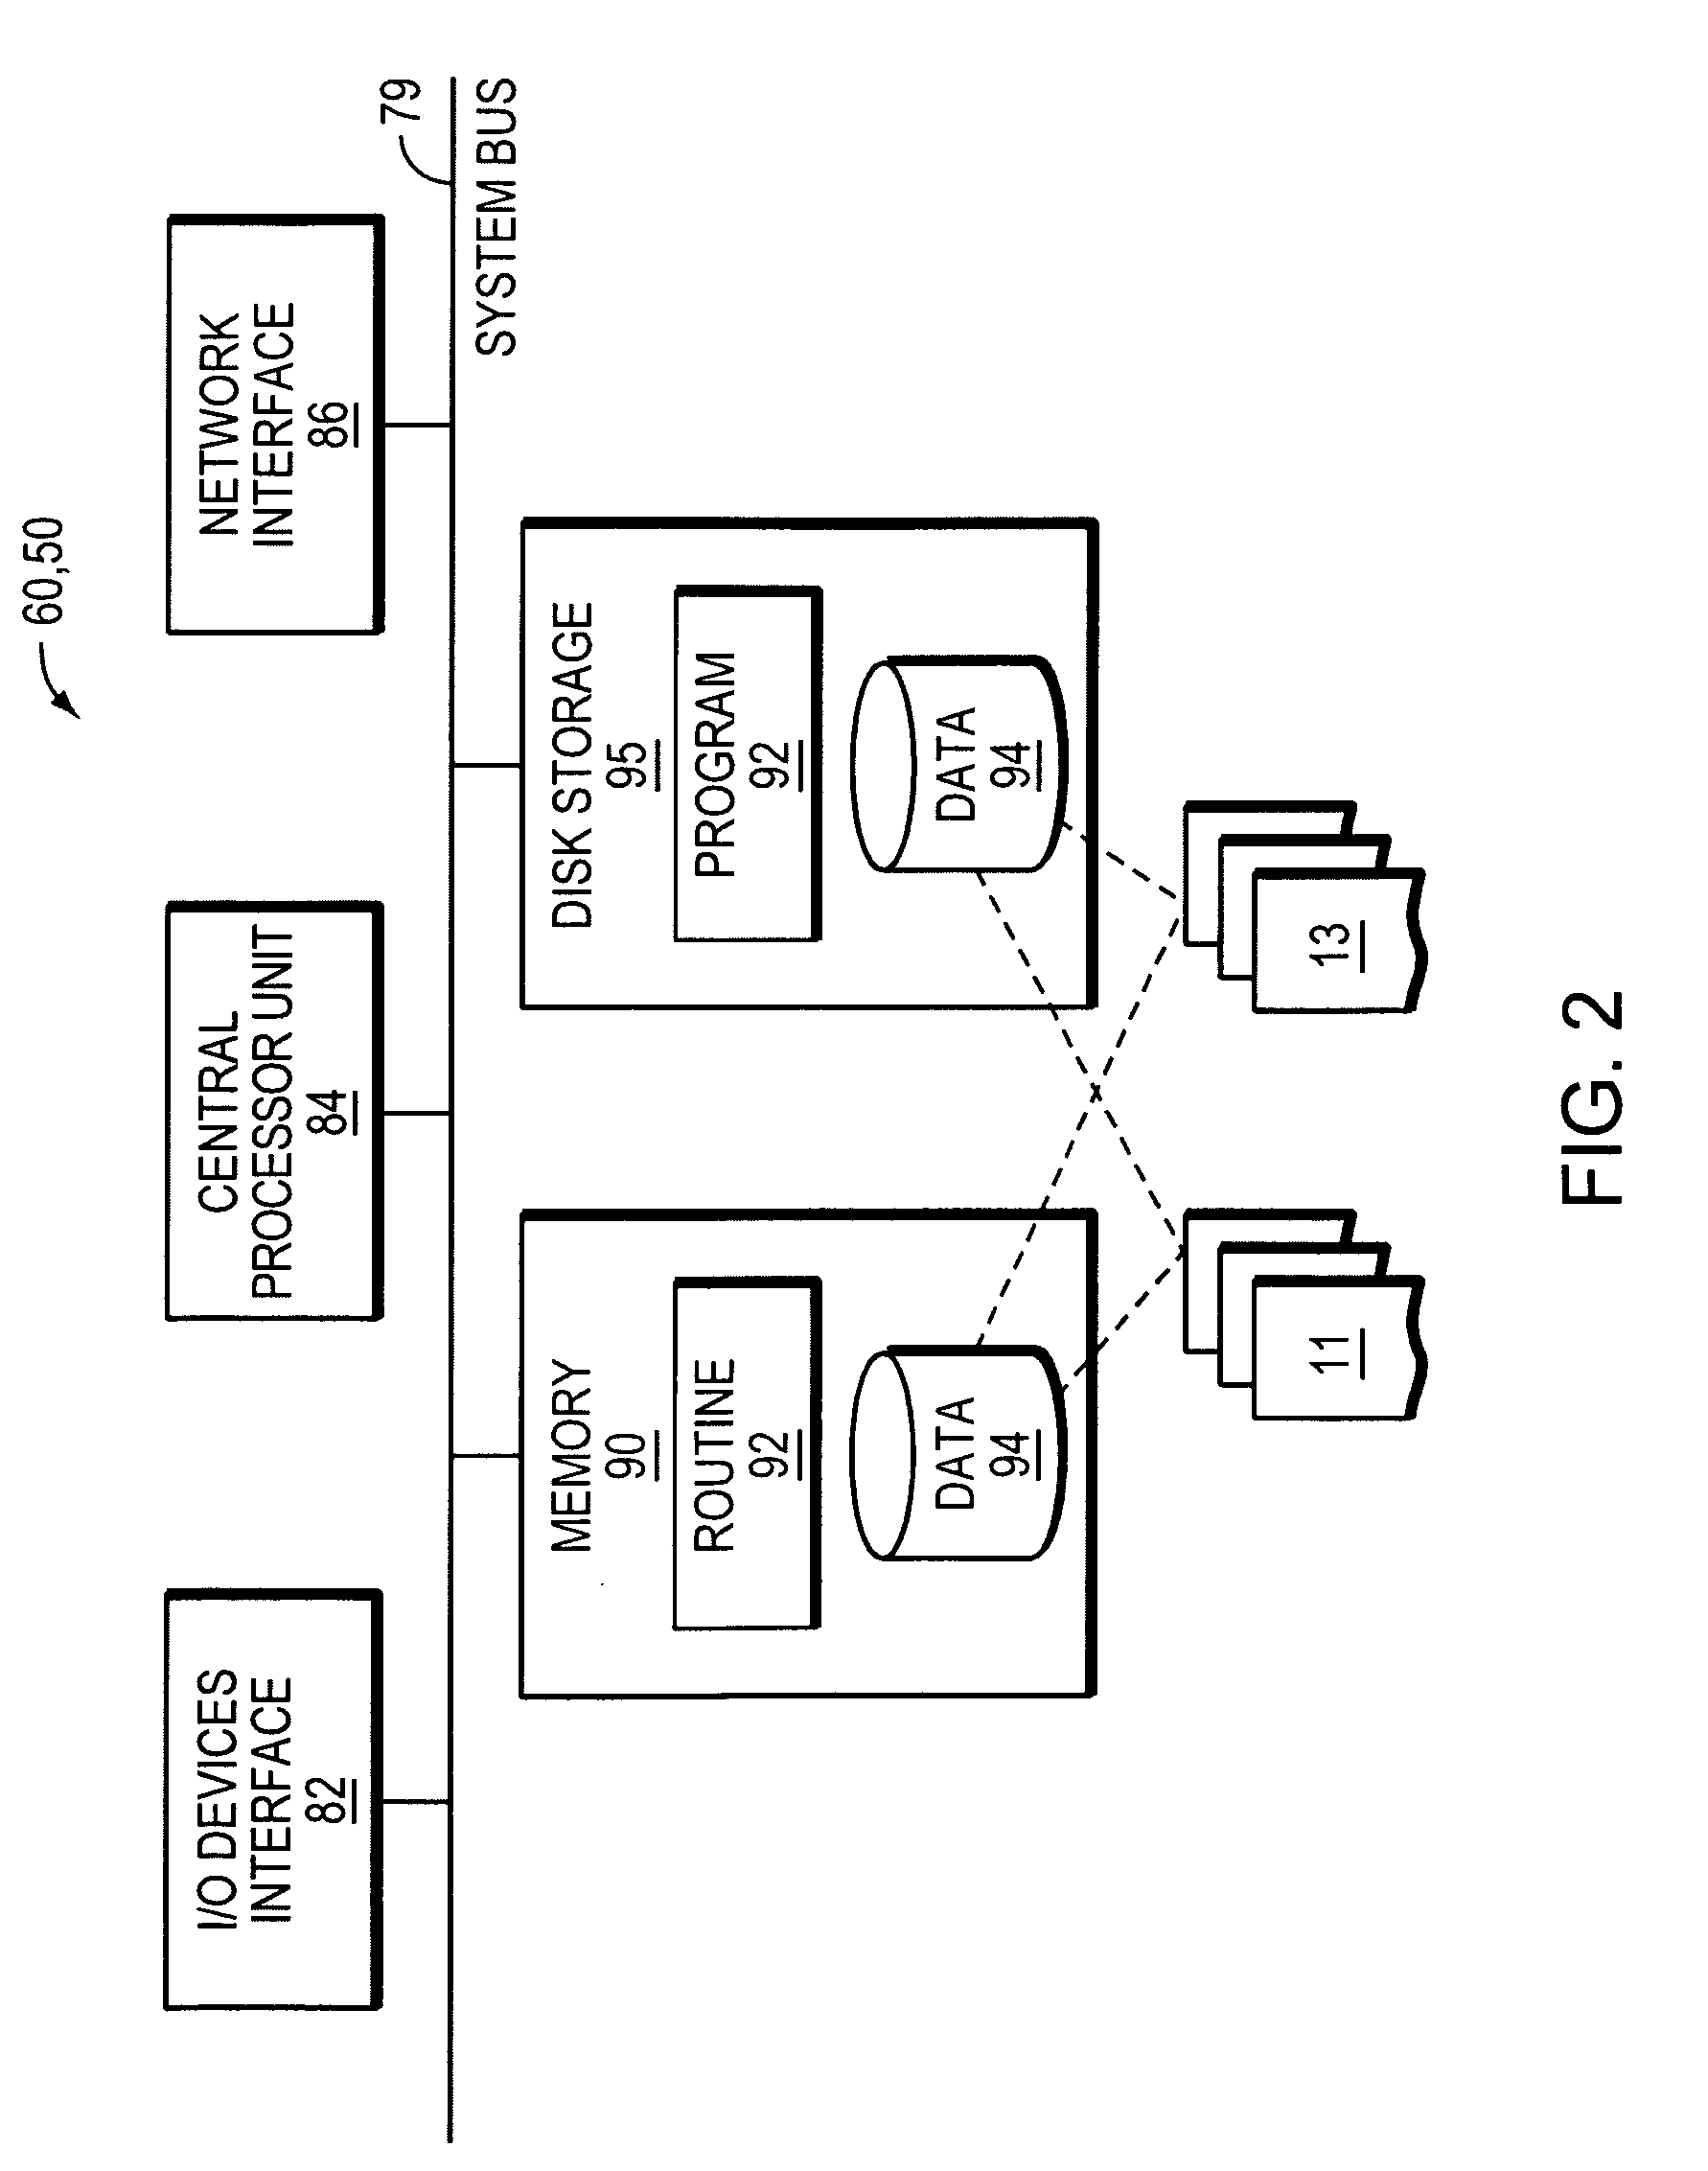 Time approximation for text location in video editing method and apparatus